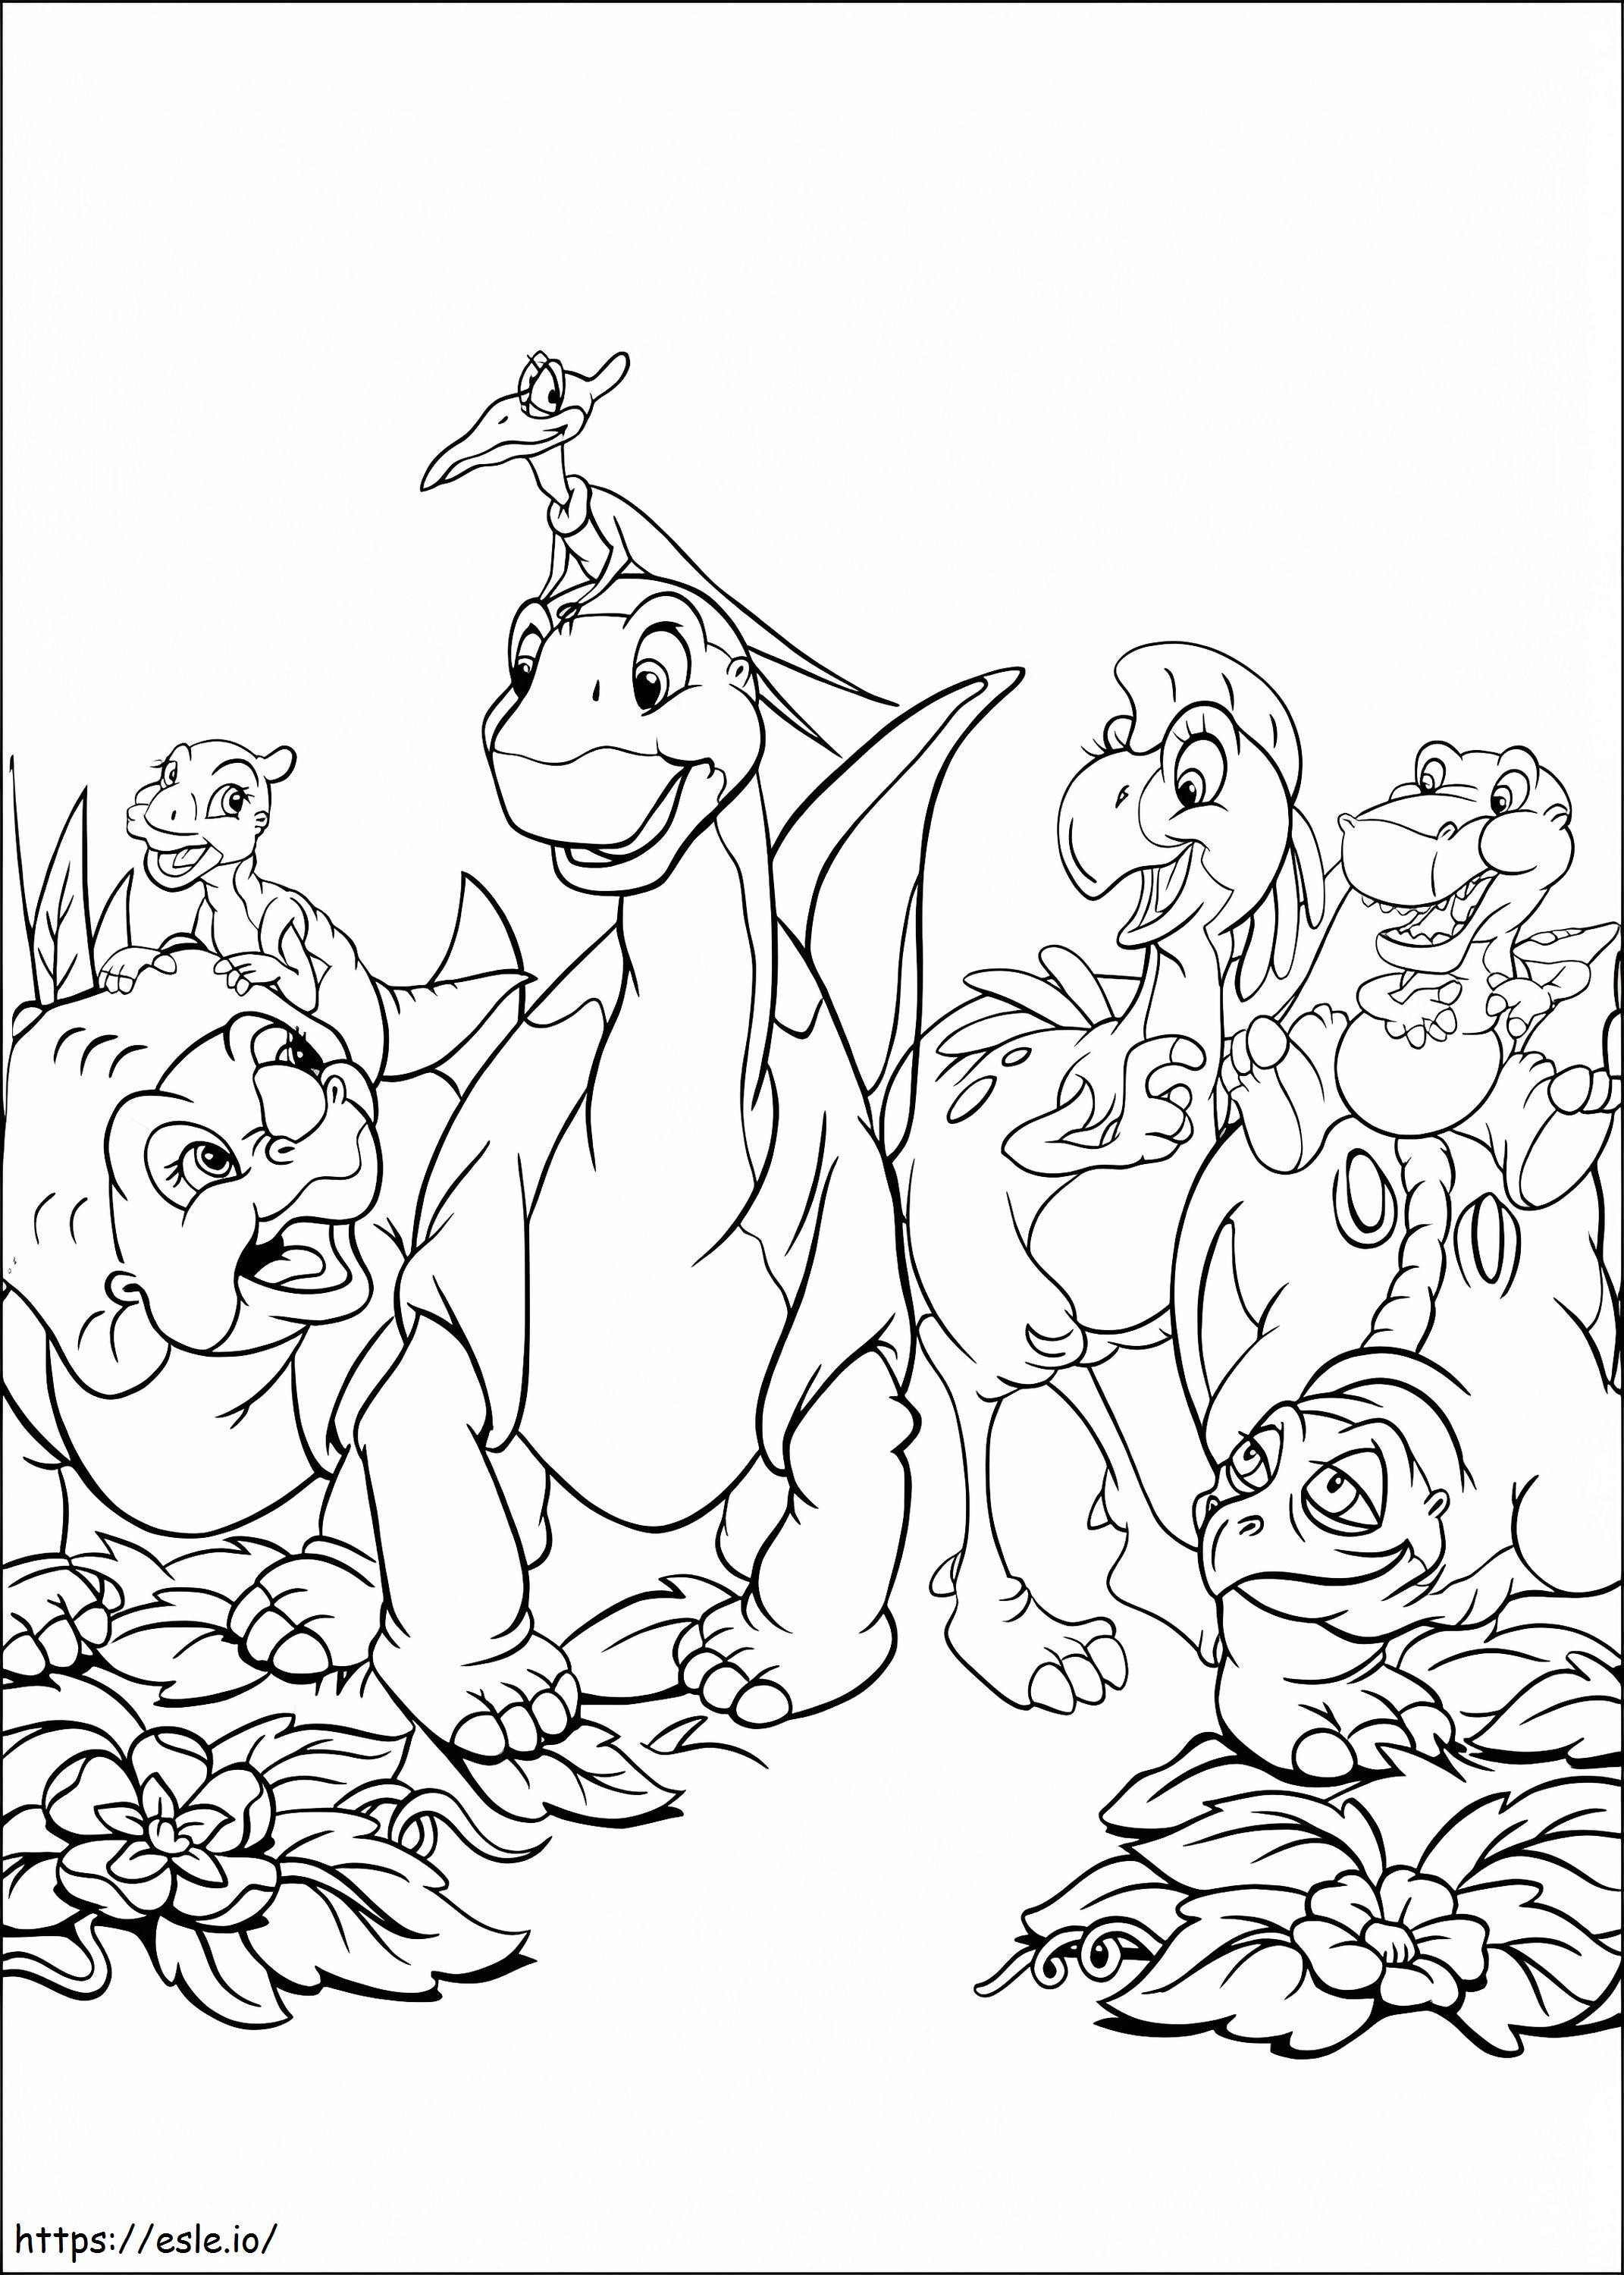 Printable Land Before Time coloring page